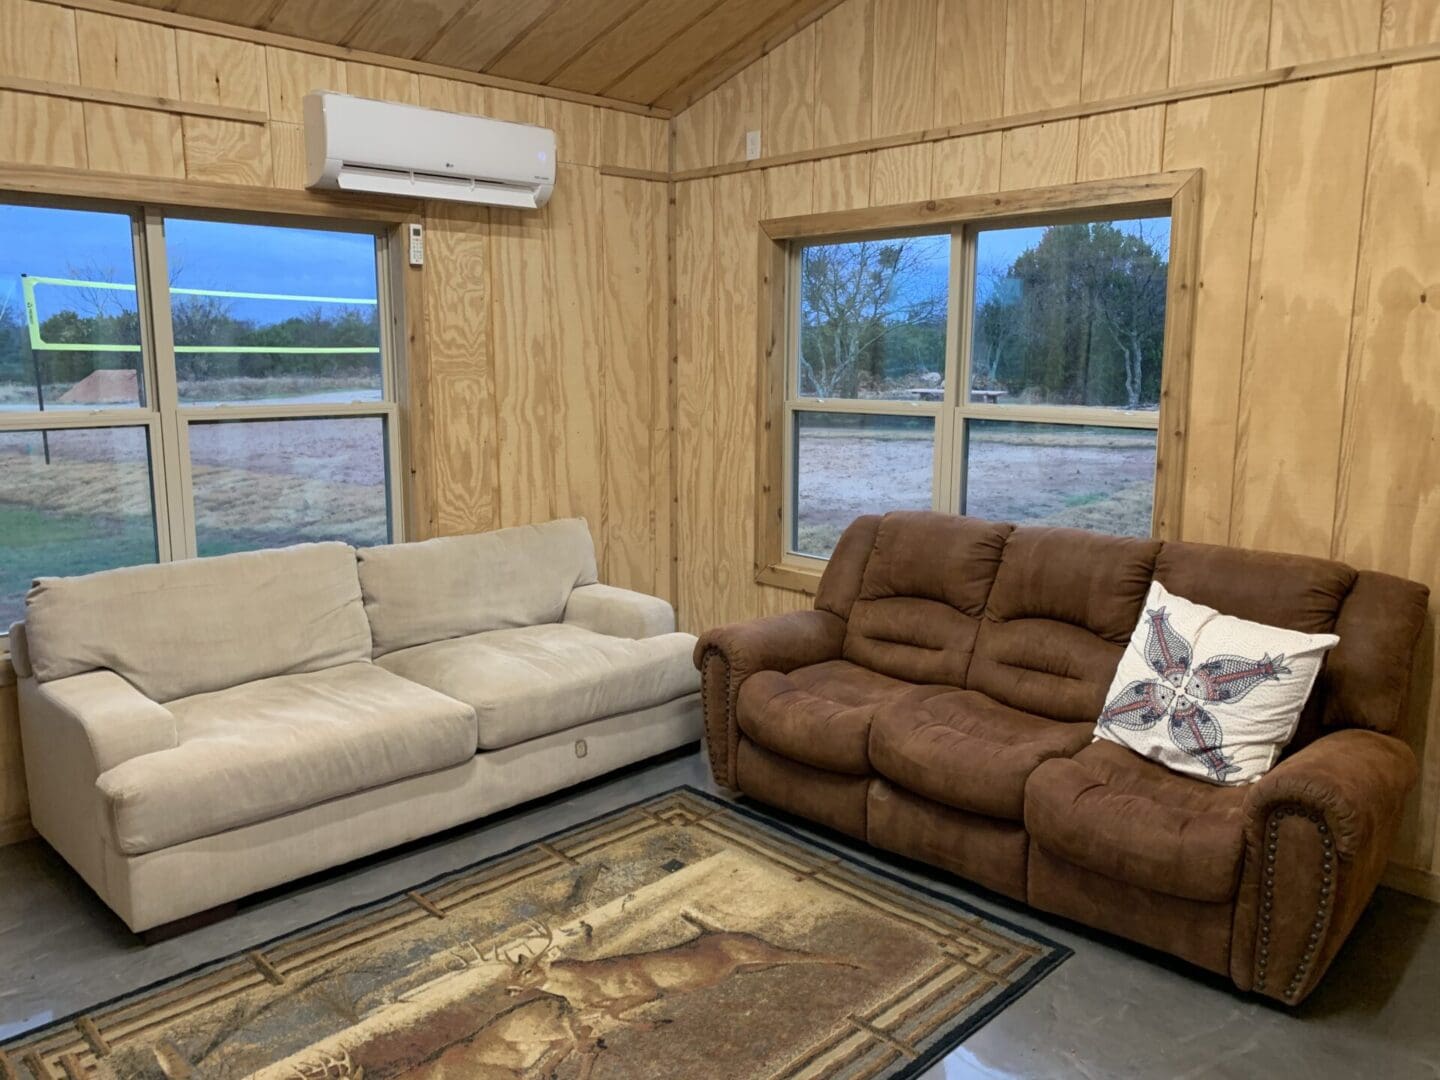 Two sofas and and a air conditioner inside the living area